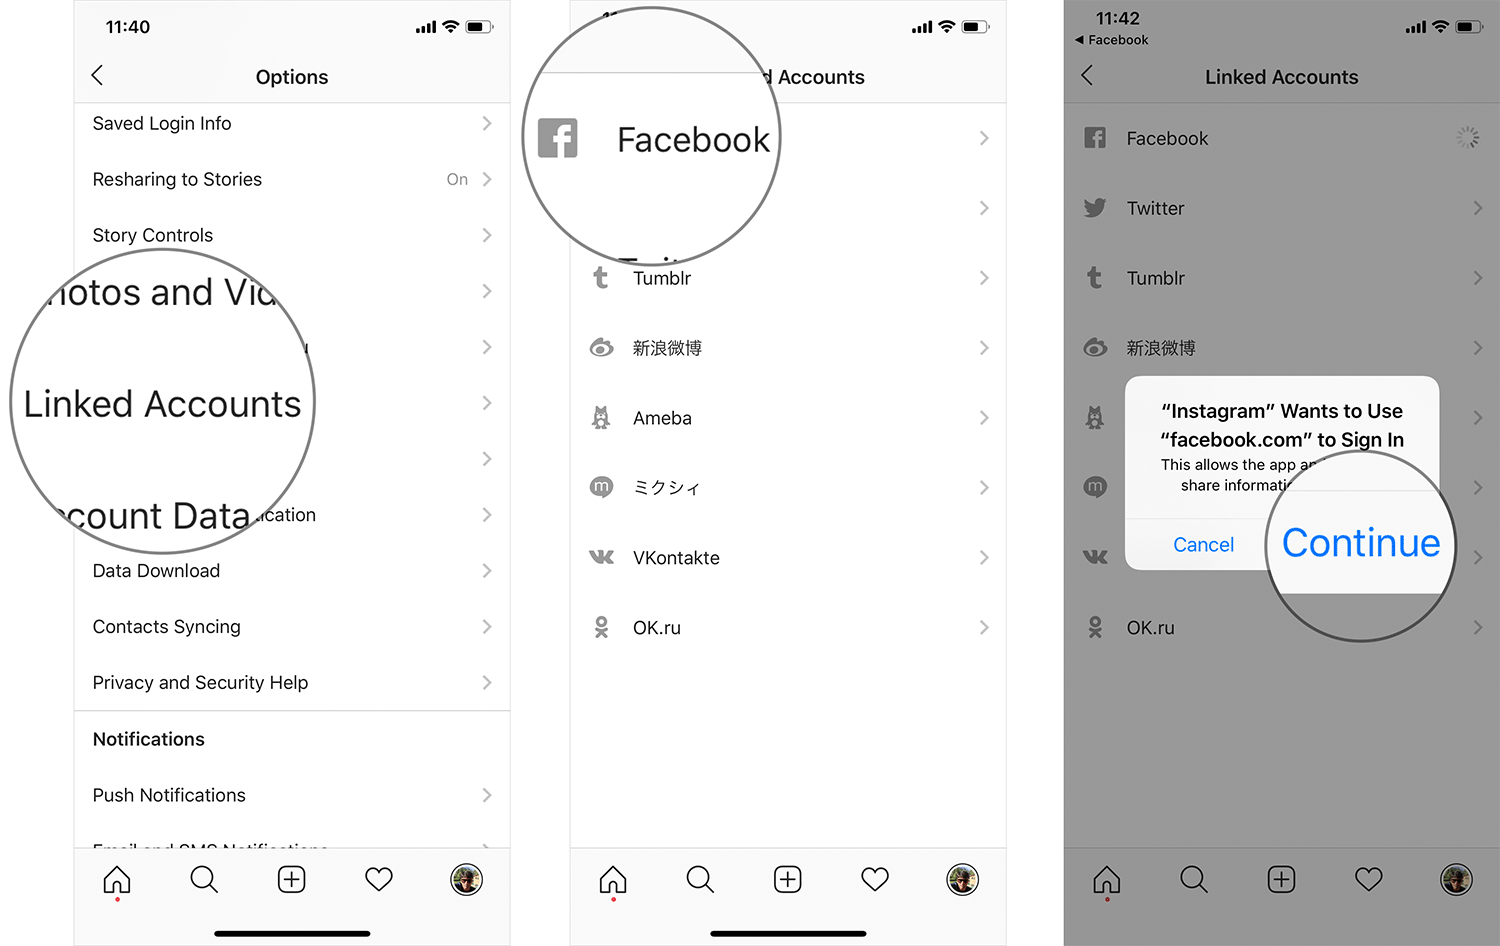 Link Facebook Account to Instagram on iPhone